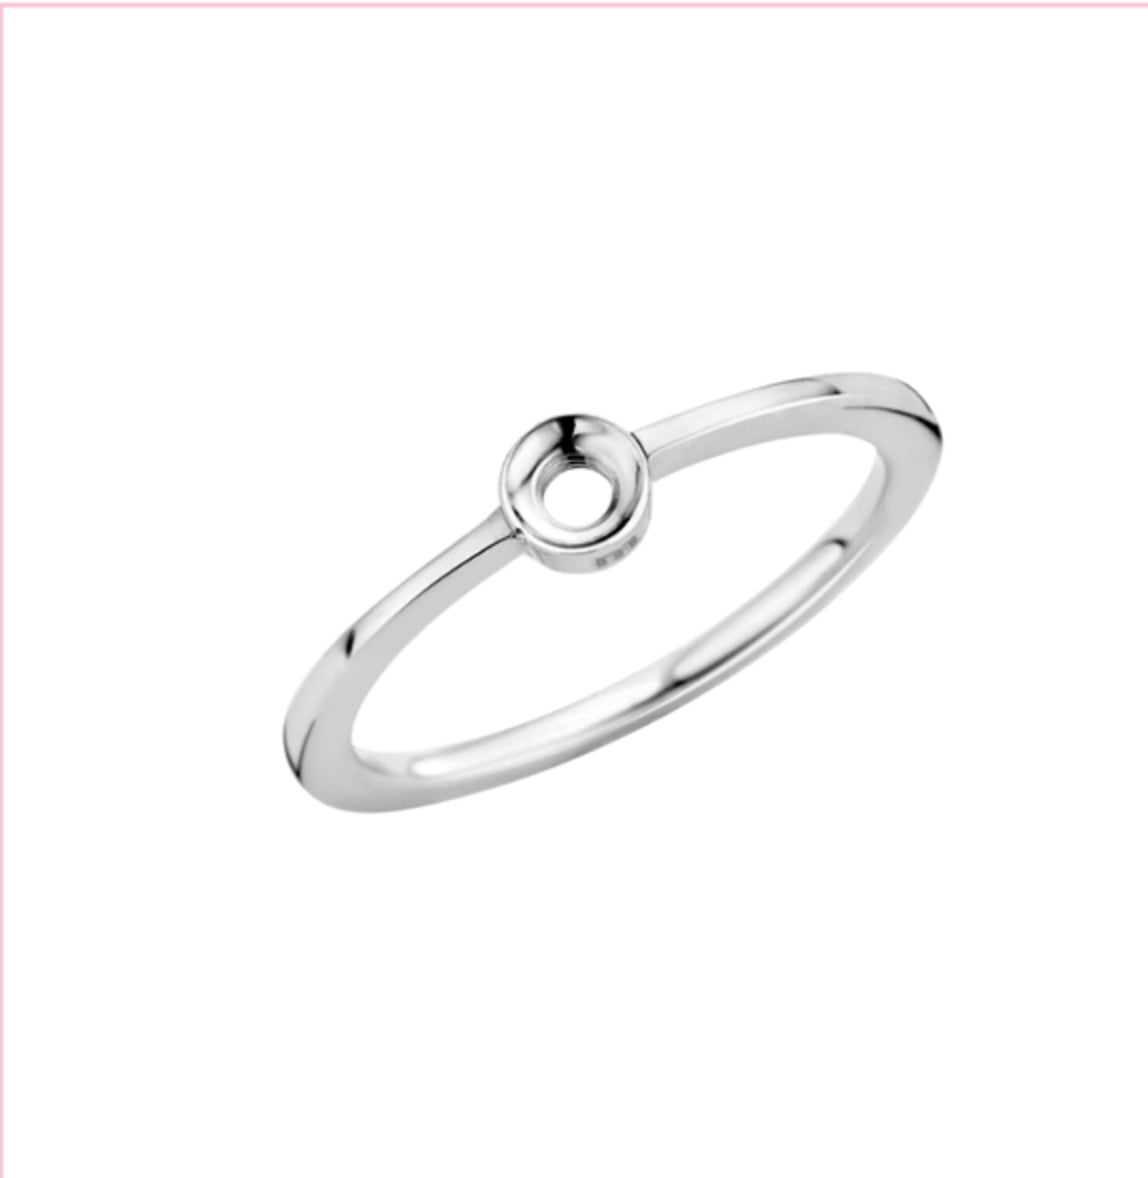 MelanO Ring Twisted Petite - Silver or Rose Gold